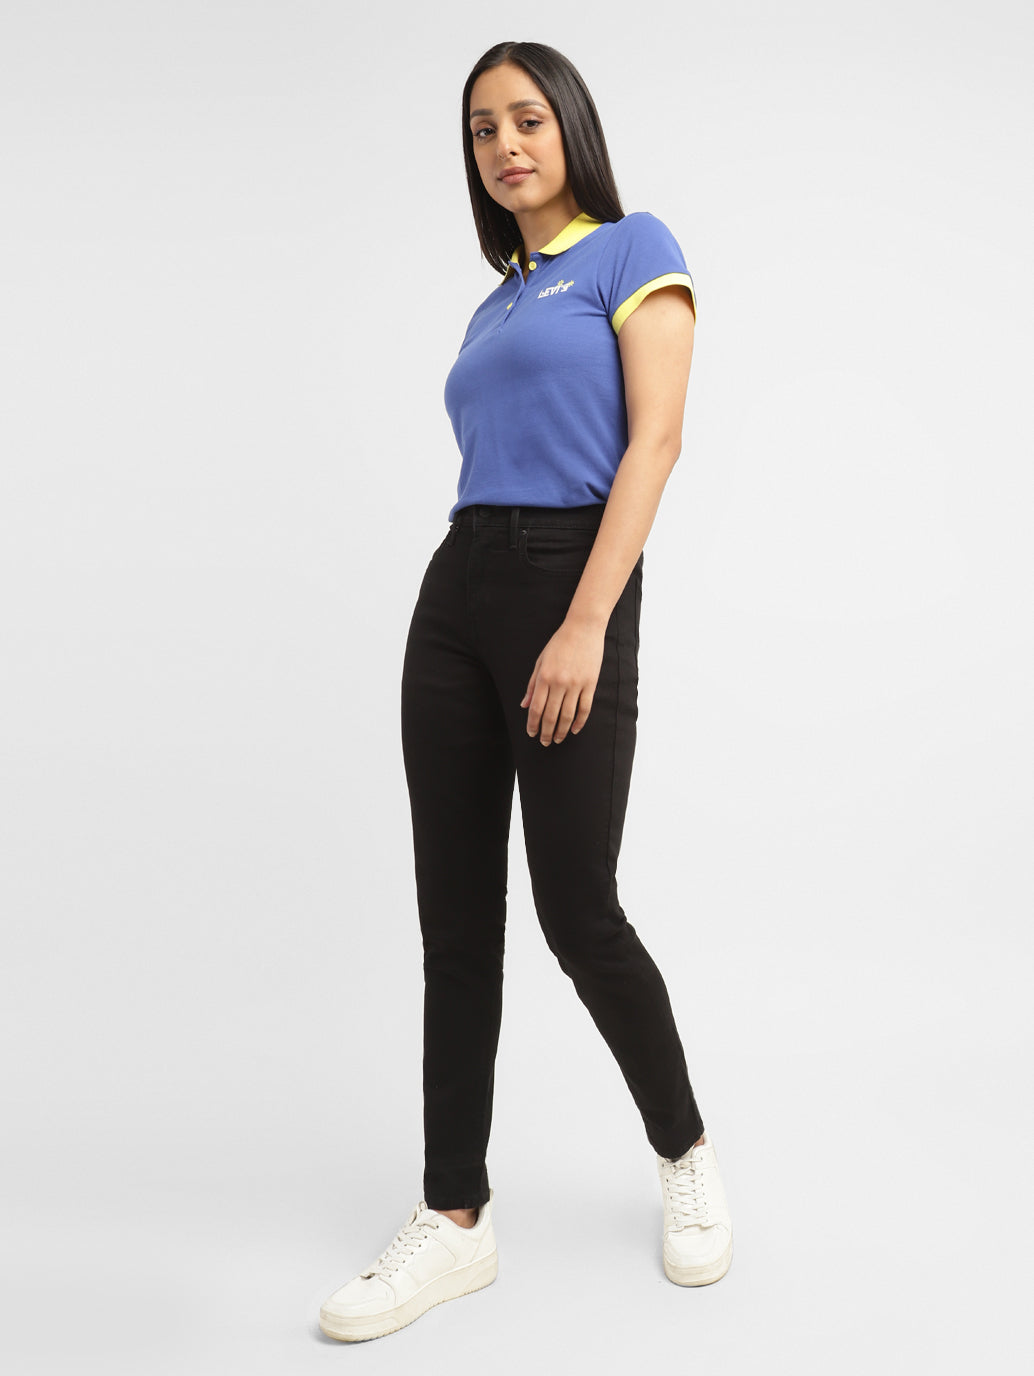 Stretchy Plus Size Ripped Leggings at Rs 2150.00